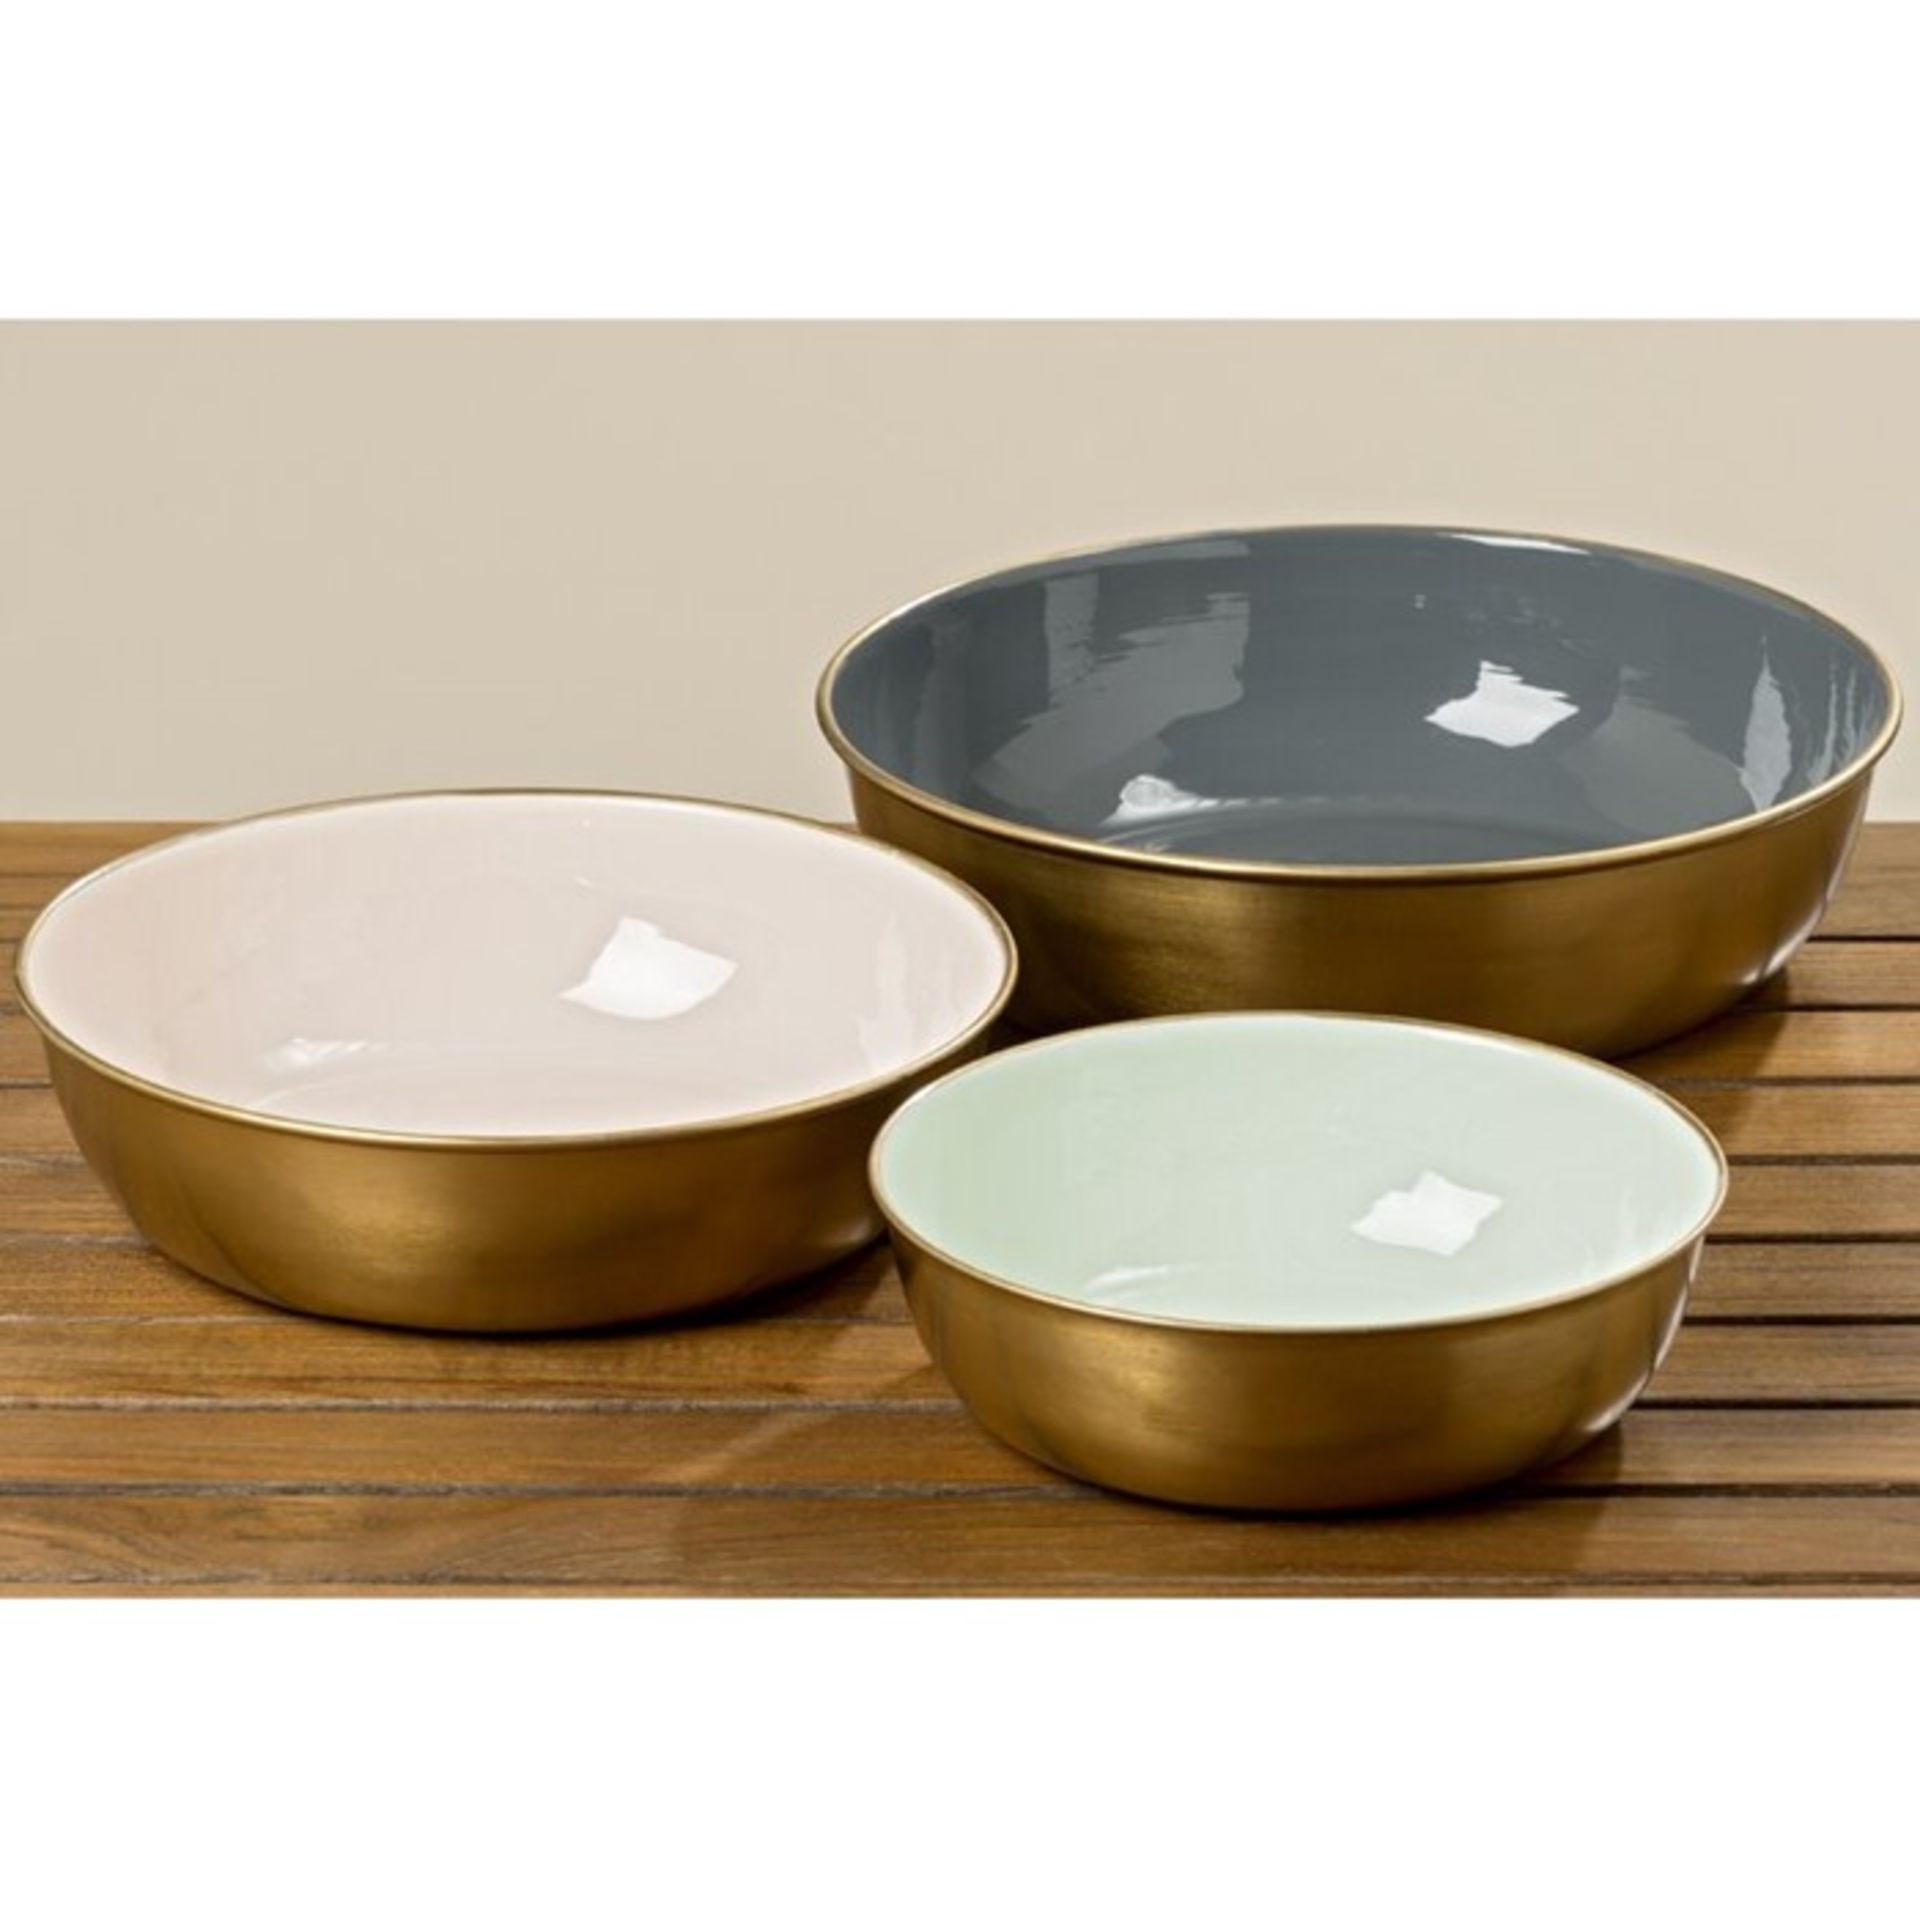 Canora Grey, Kole 3 Piece Decorative Bowl Set (WOOD COLOUR ON INSIDE - NOT GREY AND WHITE) - RRP £